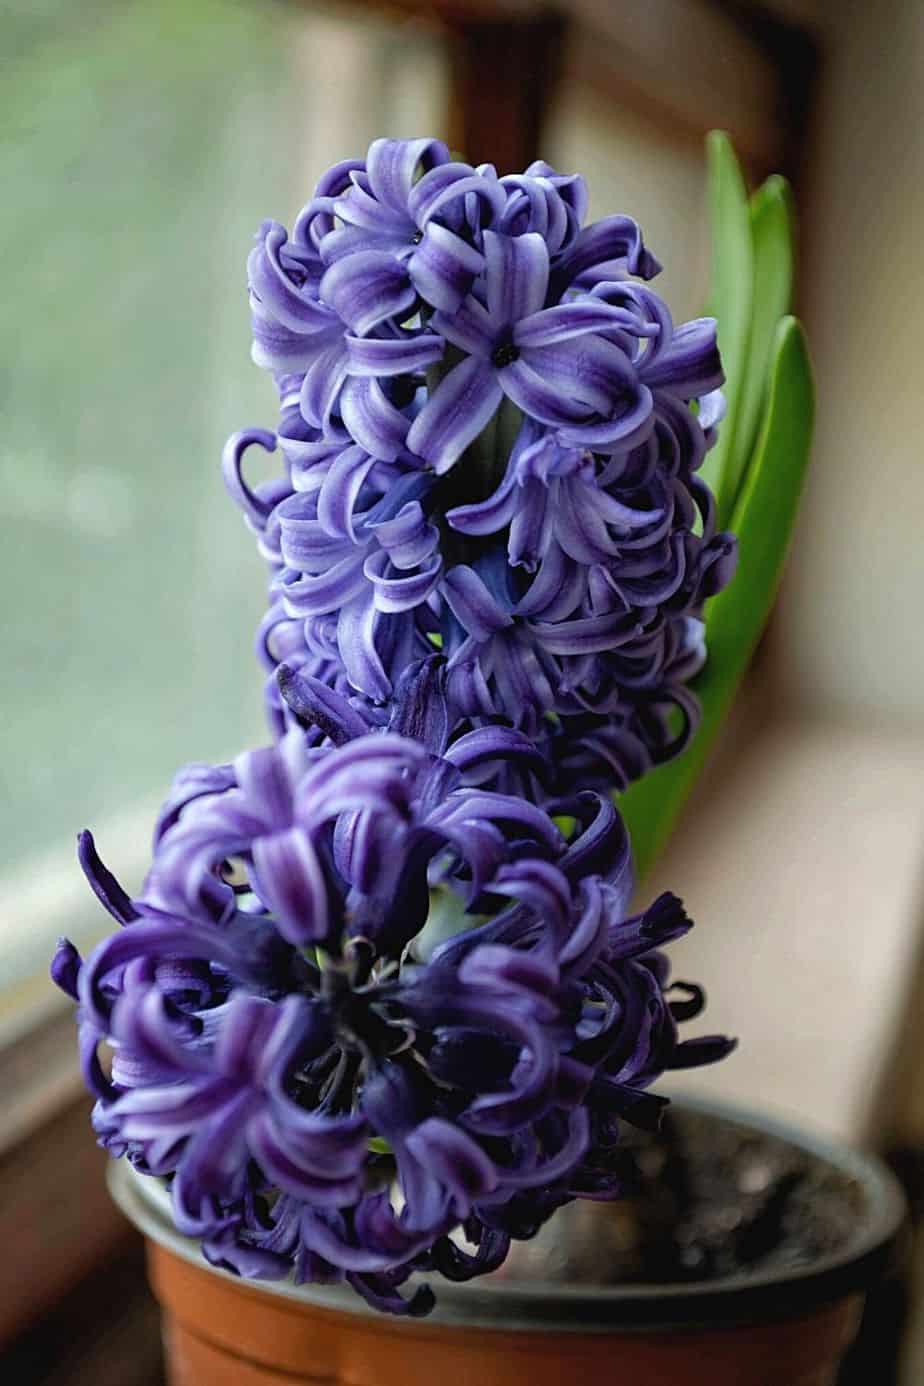 Another commonly gifted plant, Hyacinth is toxic for cats